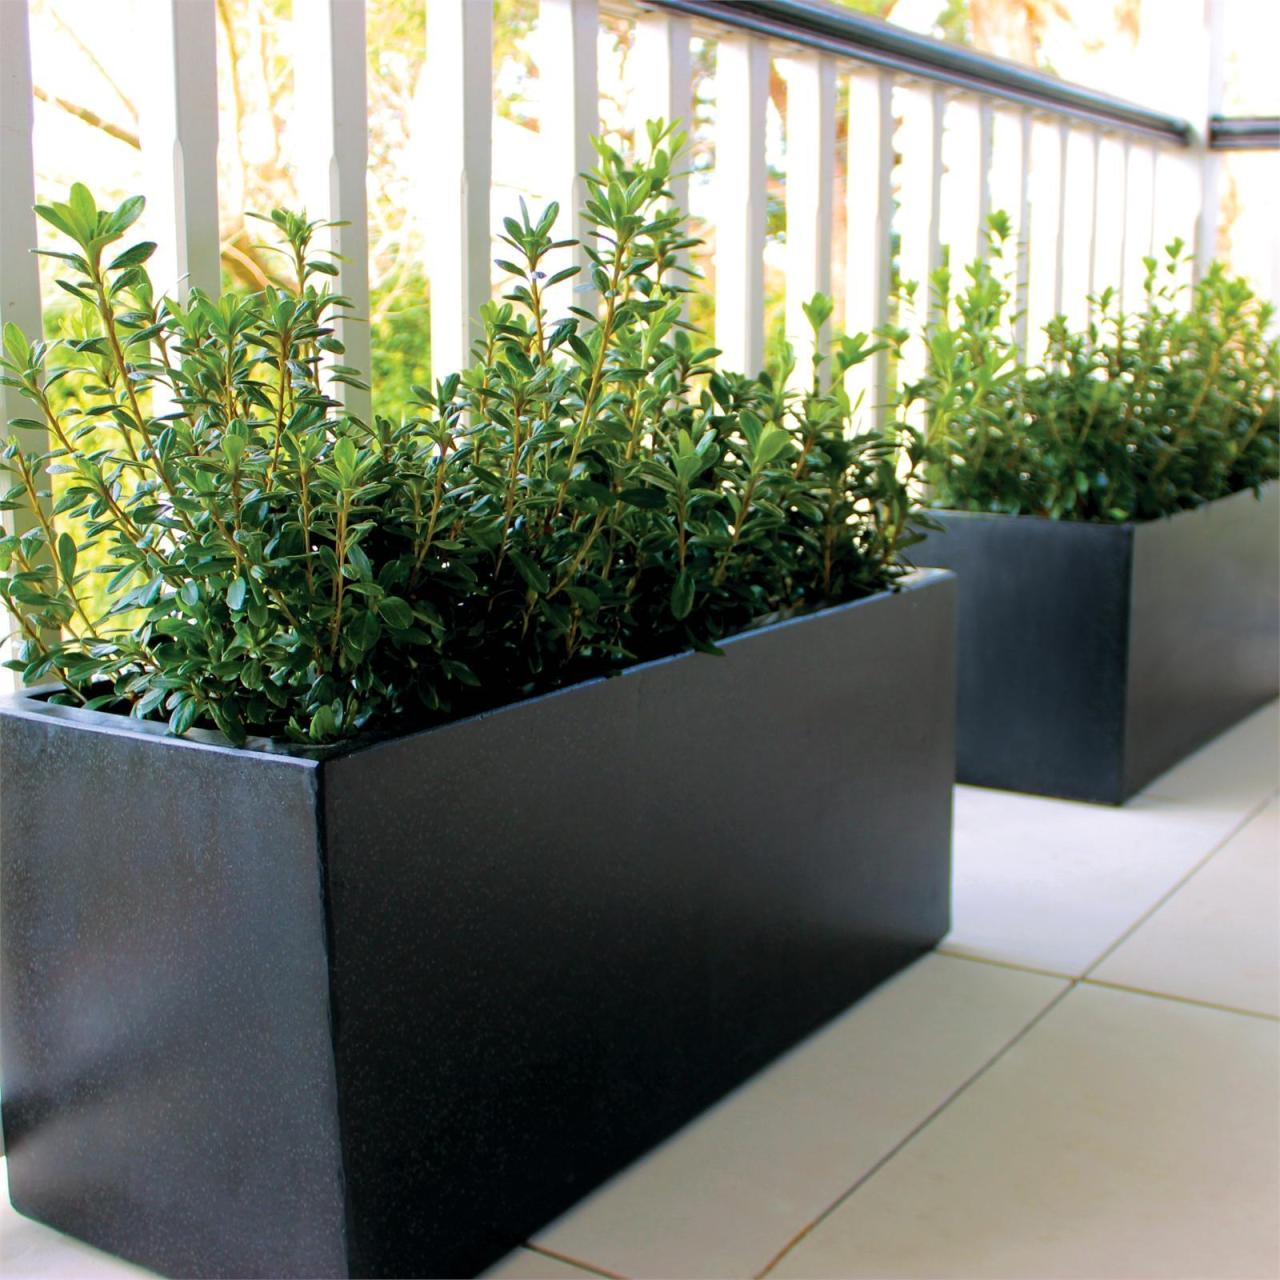 Hanging Plants Indoor | Bunnings Outdoor Pots: A Guide to Materials, Plants, Design, and Care